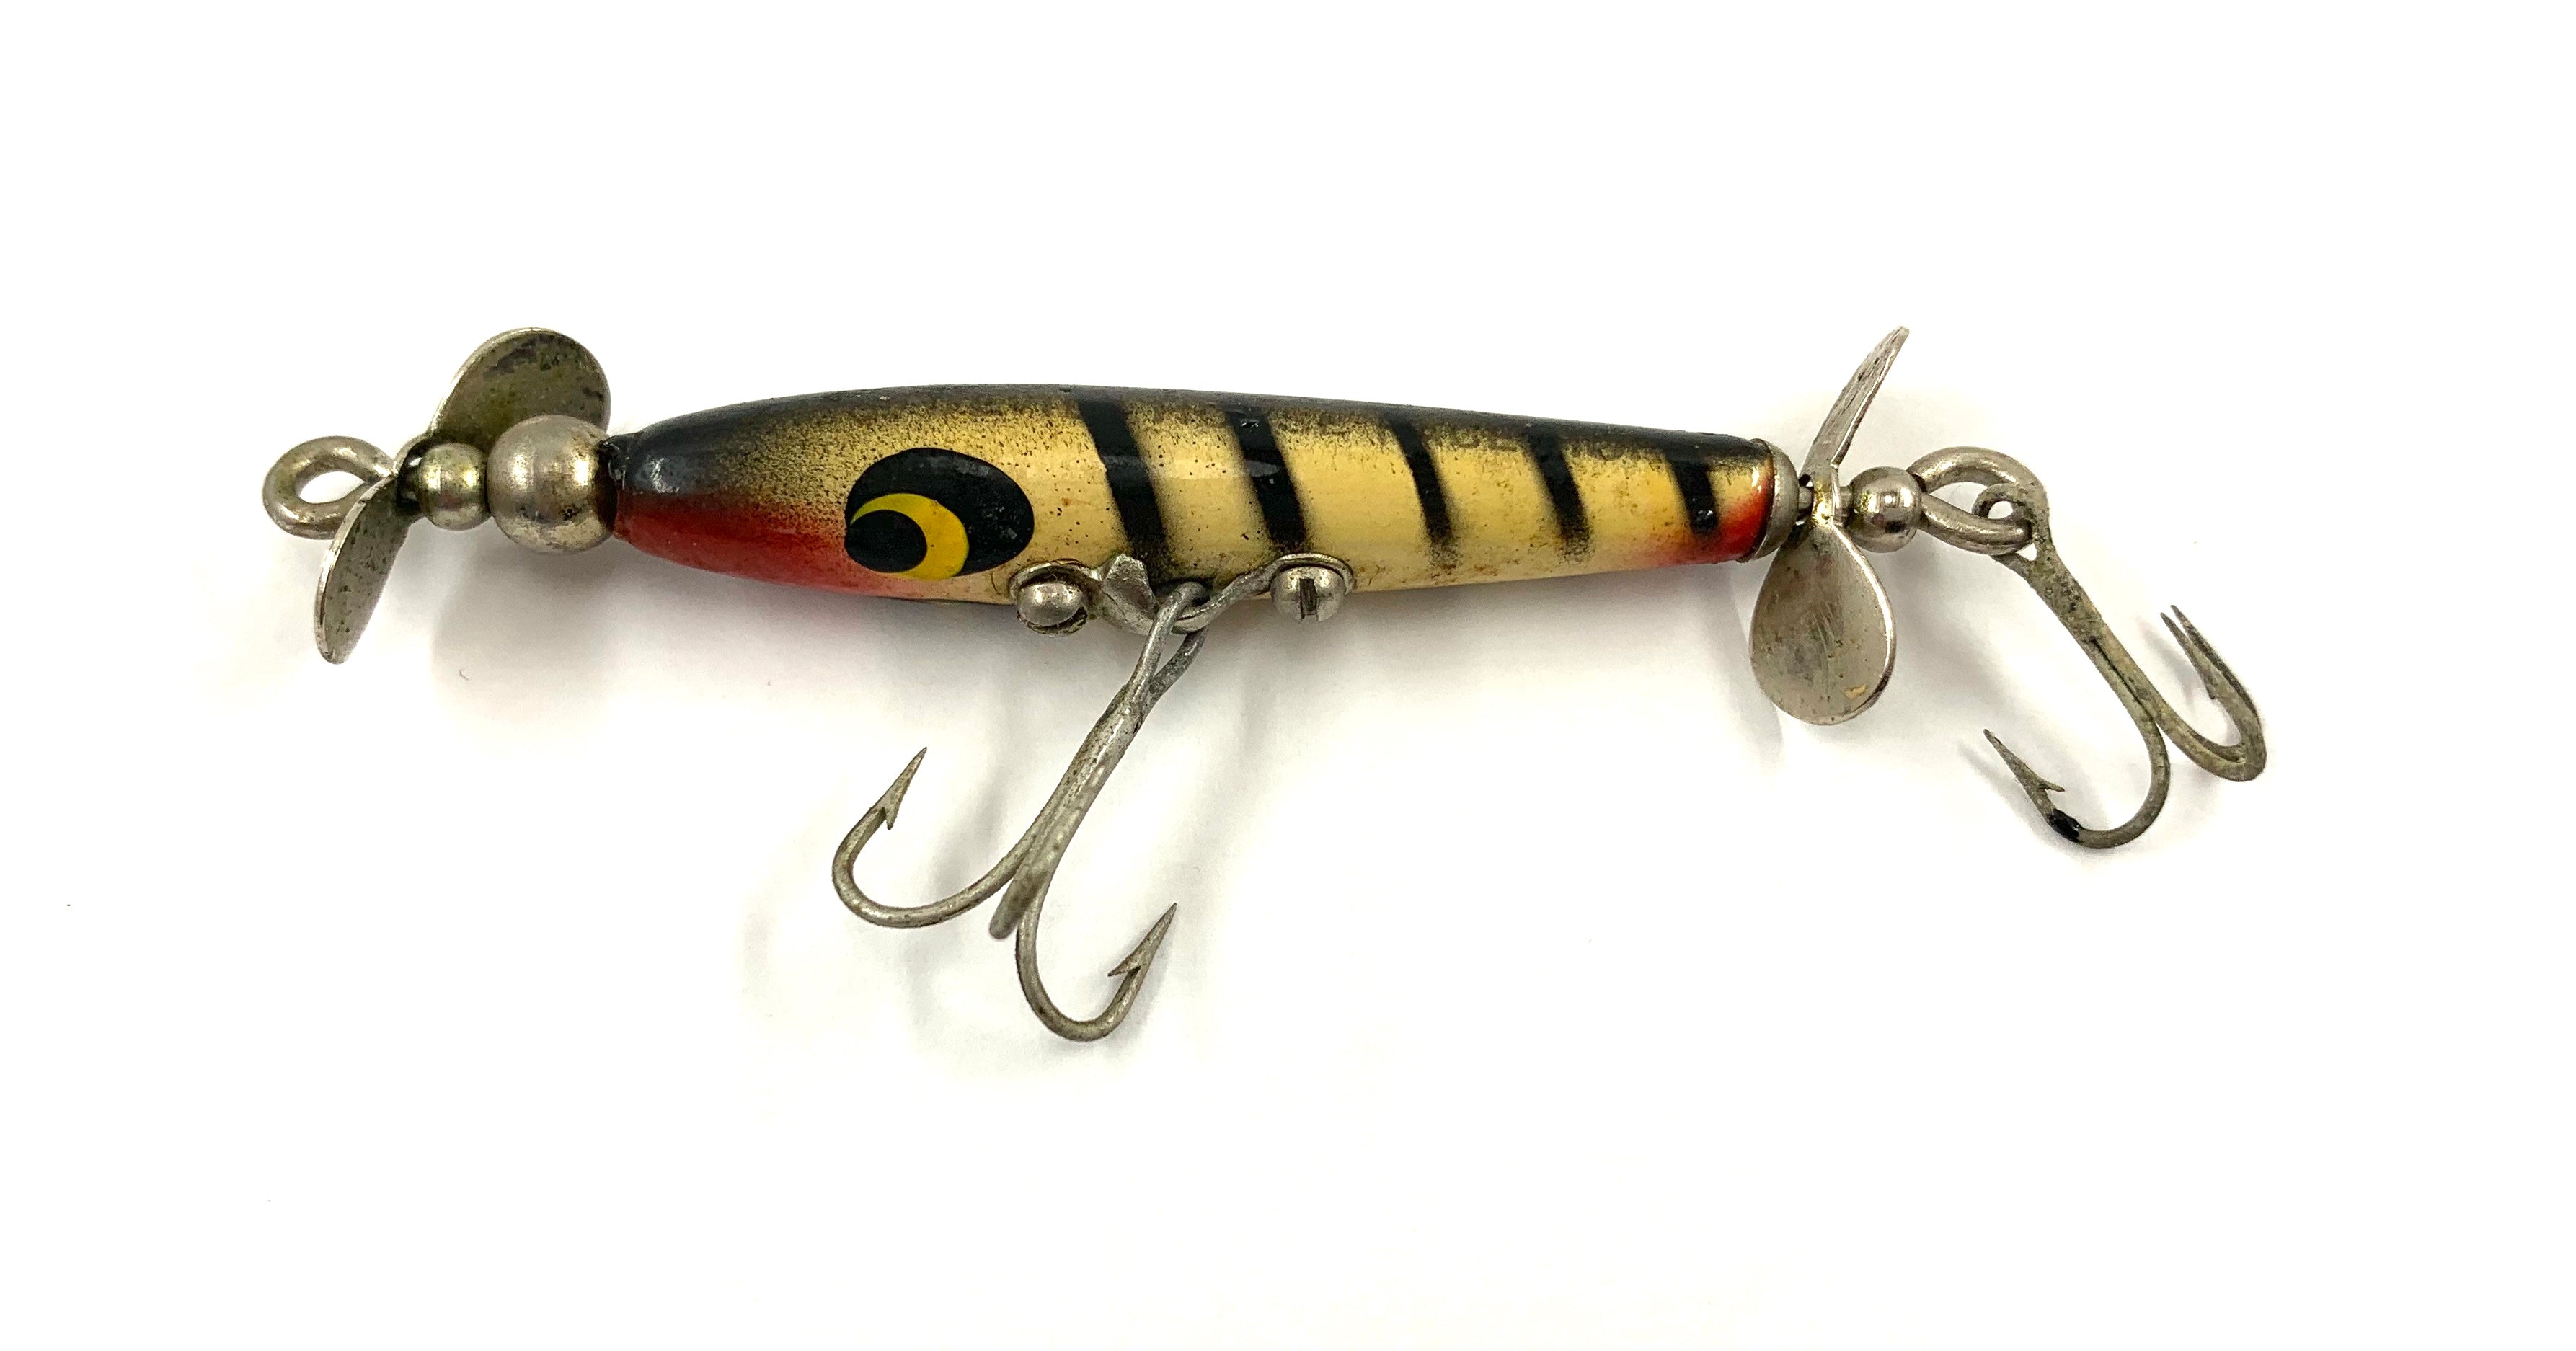 Vintage Smithwick Fishing Lures at Toad Tackle – Tagged smithwick